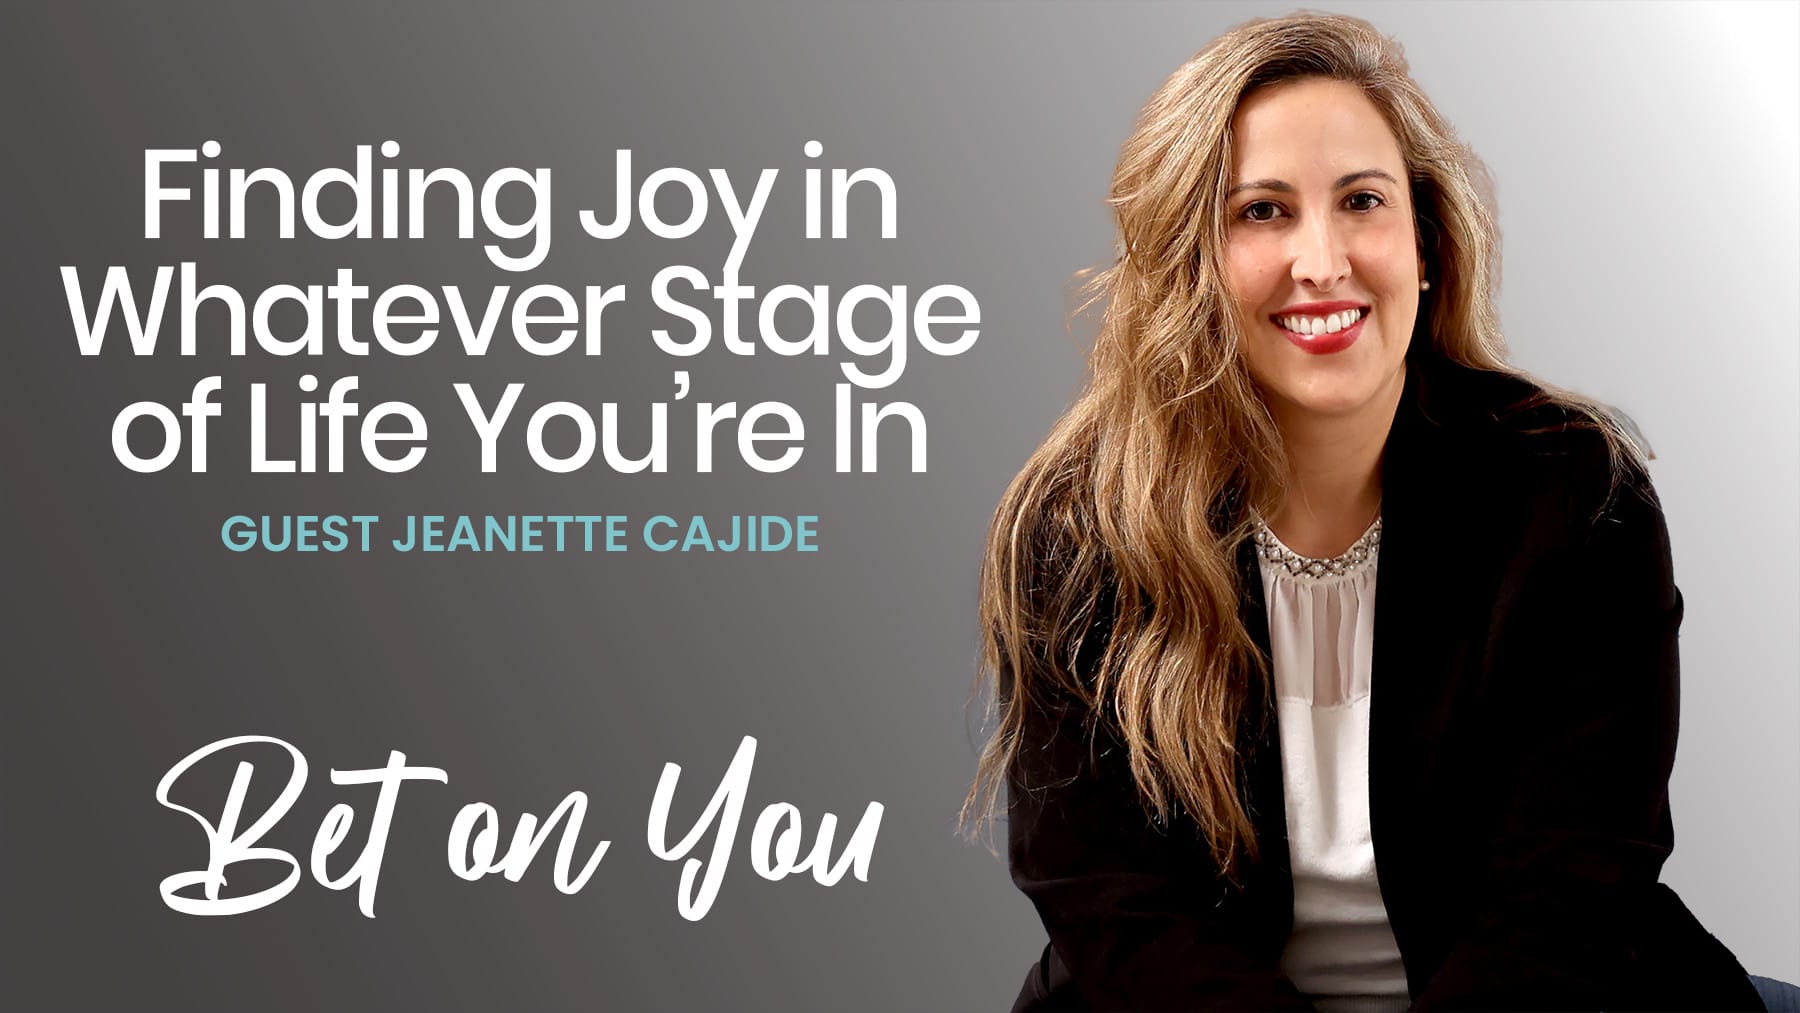 Bet on You Podcast with Guest Jeanette Cajide